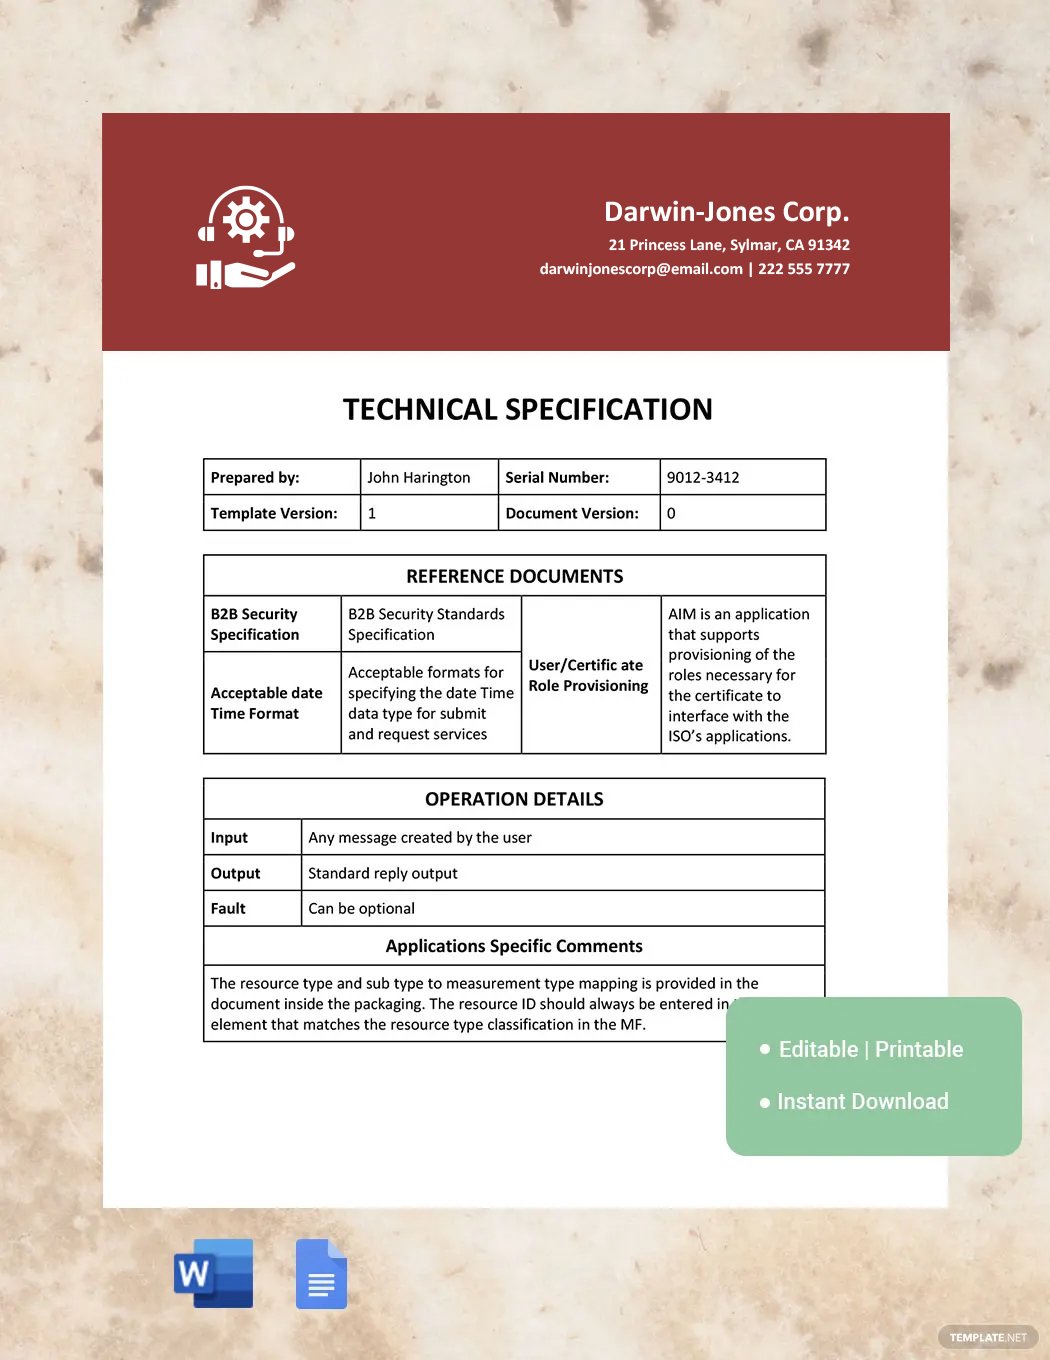 Sample Technical Specification Template in Word, Google Docs